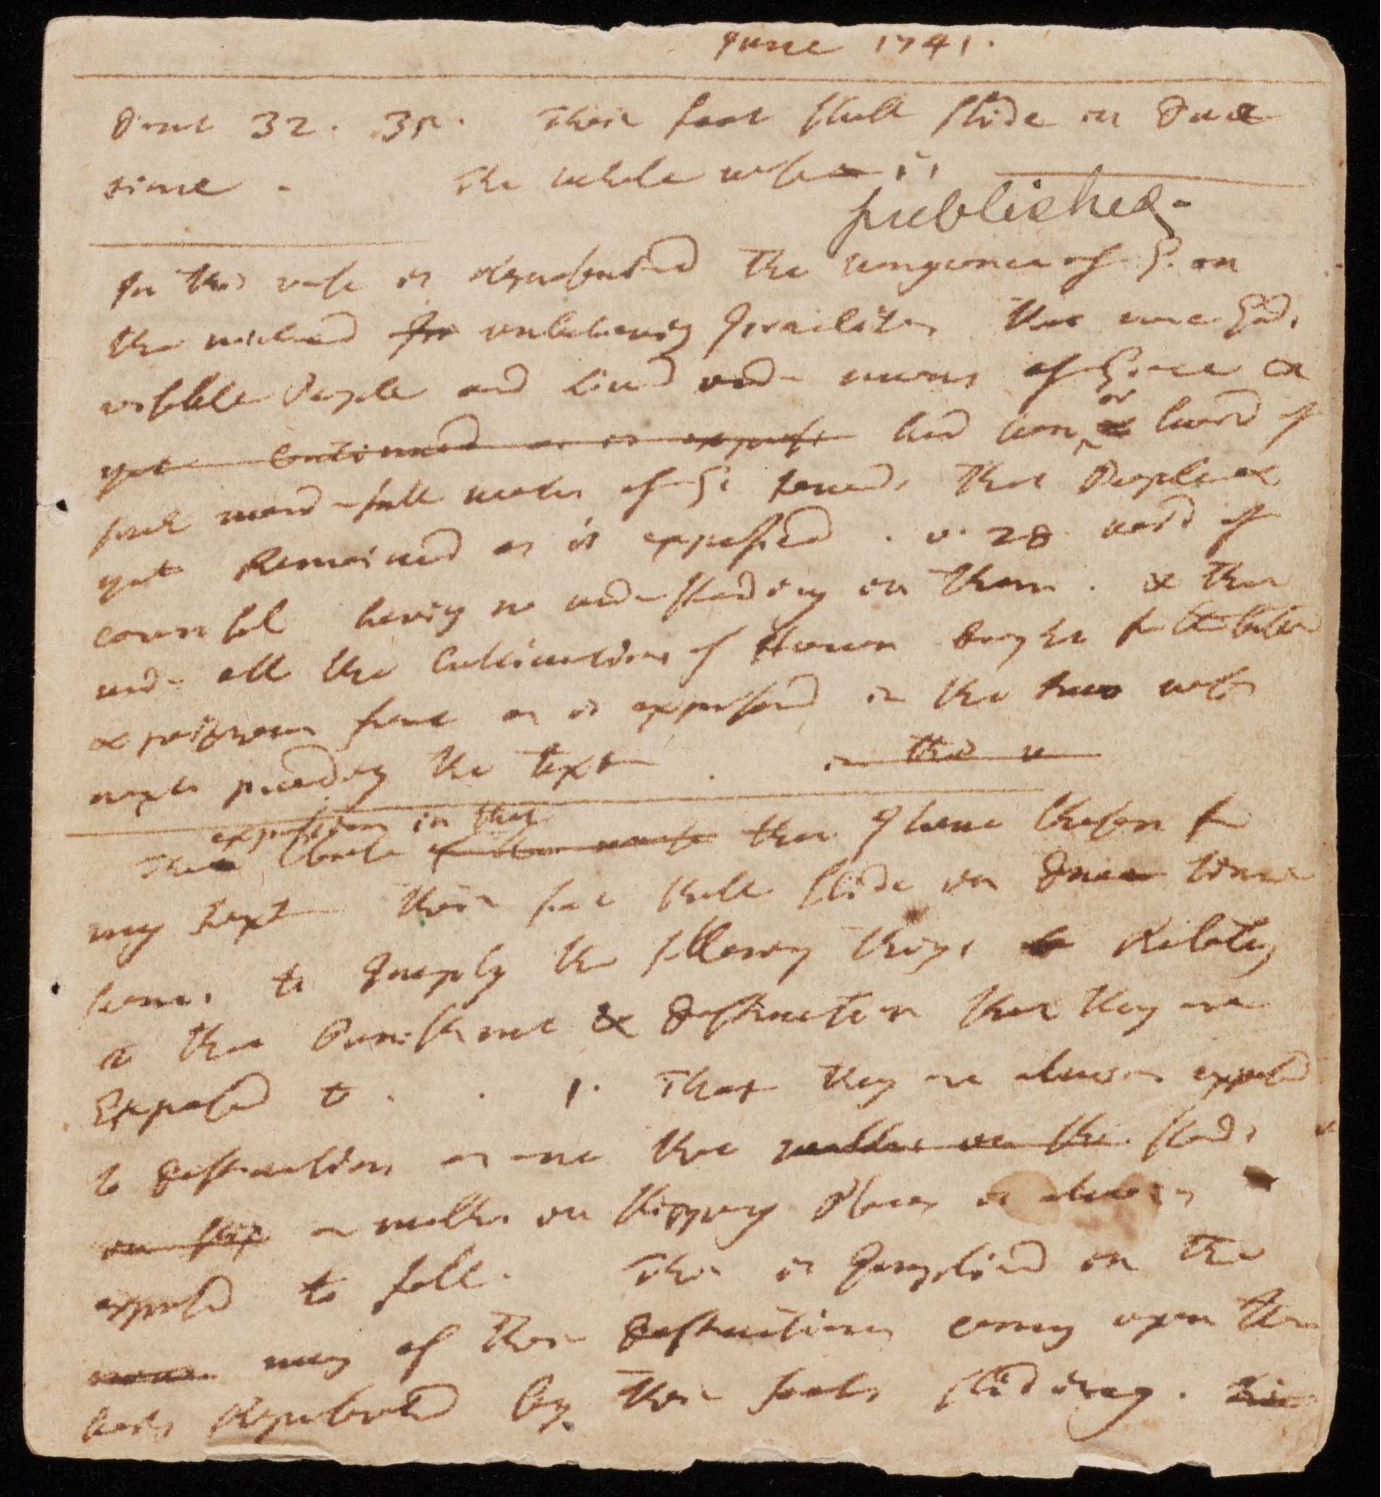 The manuscript of “Sinners in the Hands of an Angry God.” Edwards's renowned sermon has been made accessible online with NEH funding. Image courtesy of the Jonathan Edwards Center at Yale University.